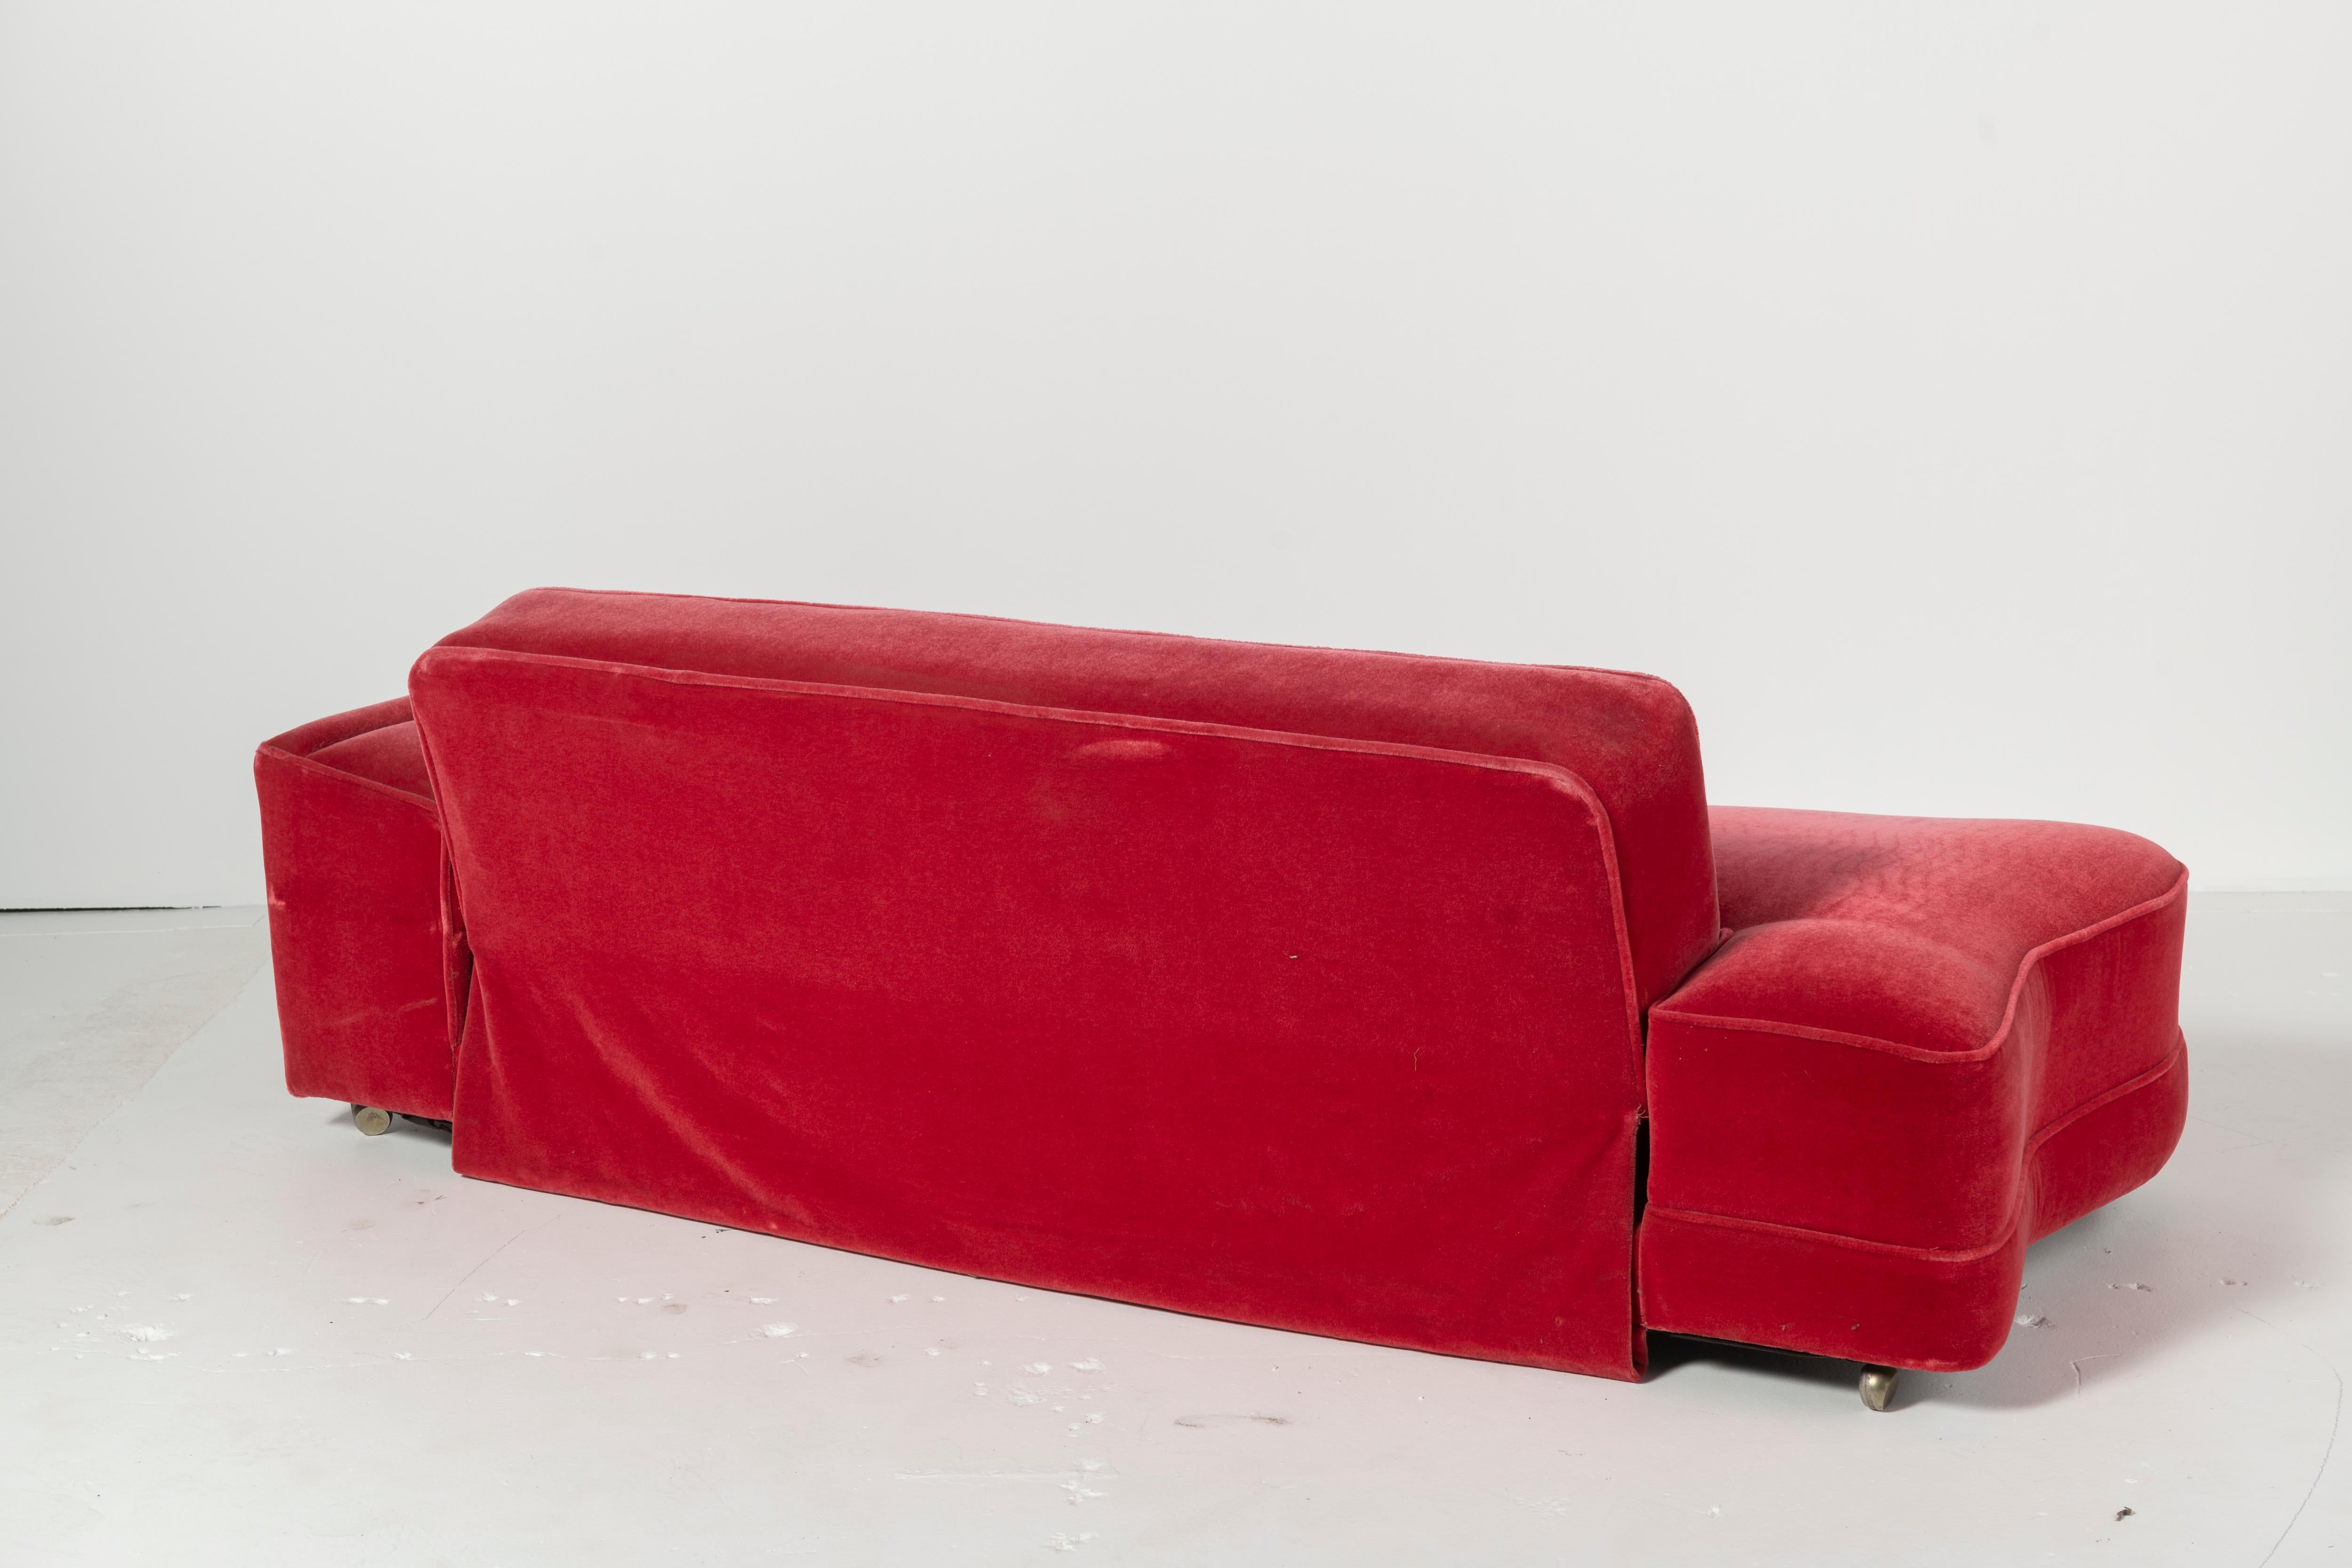 Red Mohair Sofa and Convertible Daybed, 1950s For Sale 3